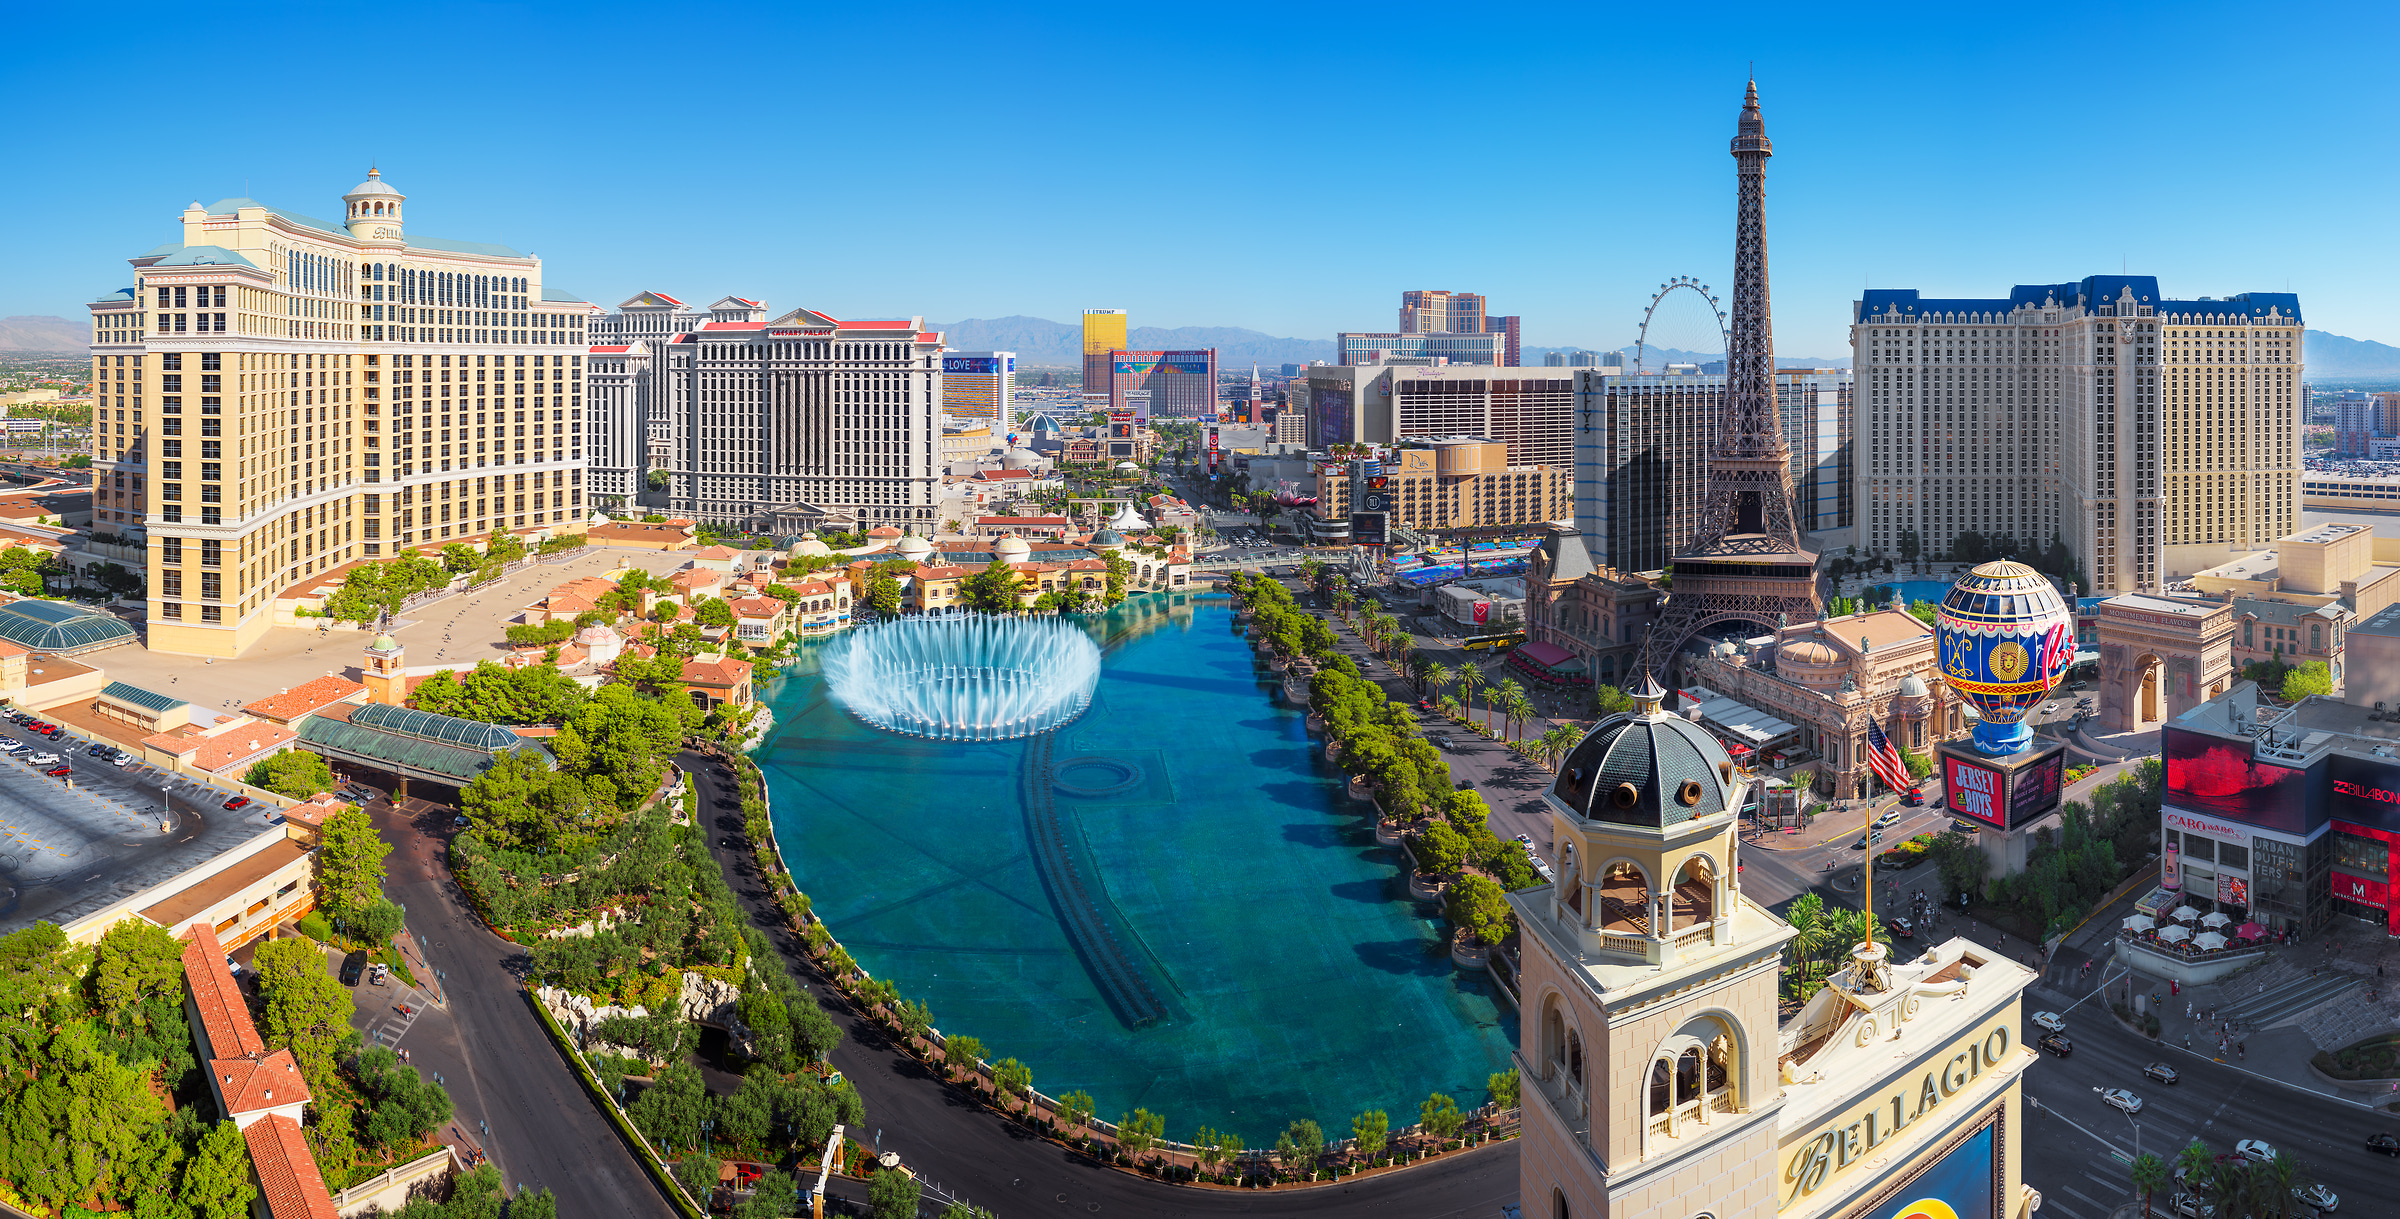 722 megapixels! A very high resolution, large-format VAST photo of the Las Vegas Strip skyline at daytime with casinos including Bellagio, Pairs; Ceasars Palace, The Venetian; cityscape photograph created by Jim Tarpo in Las Vegas, Nevada.